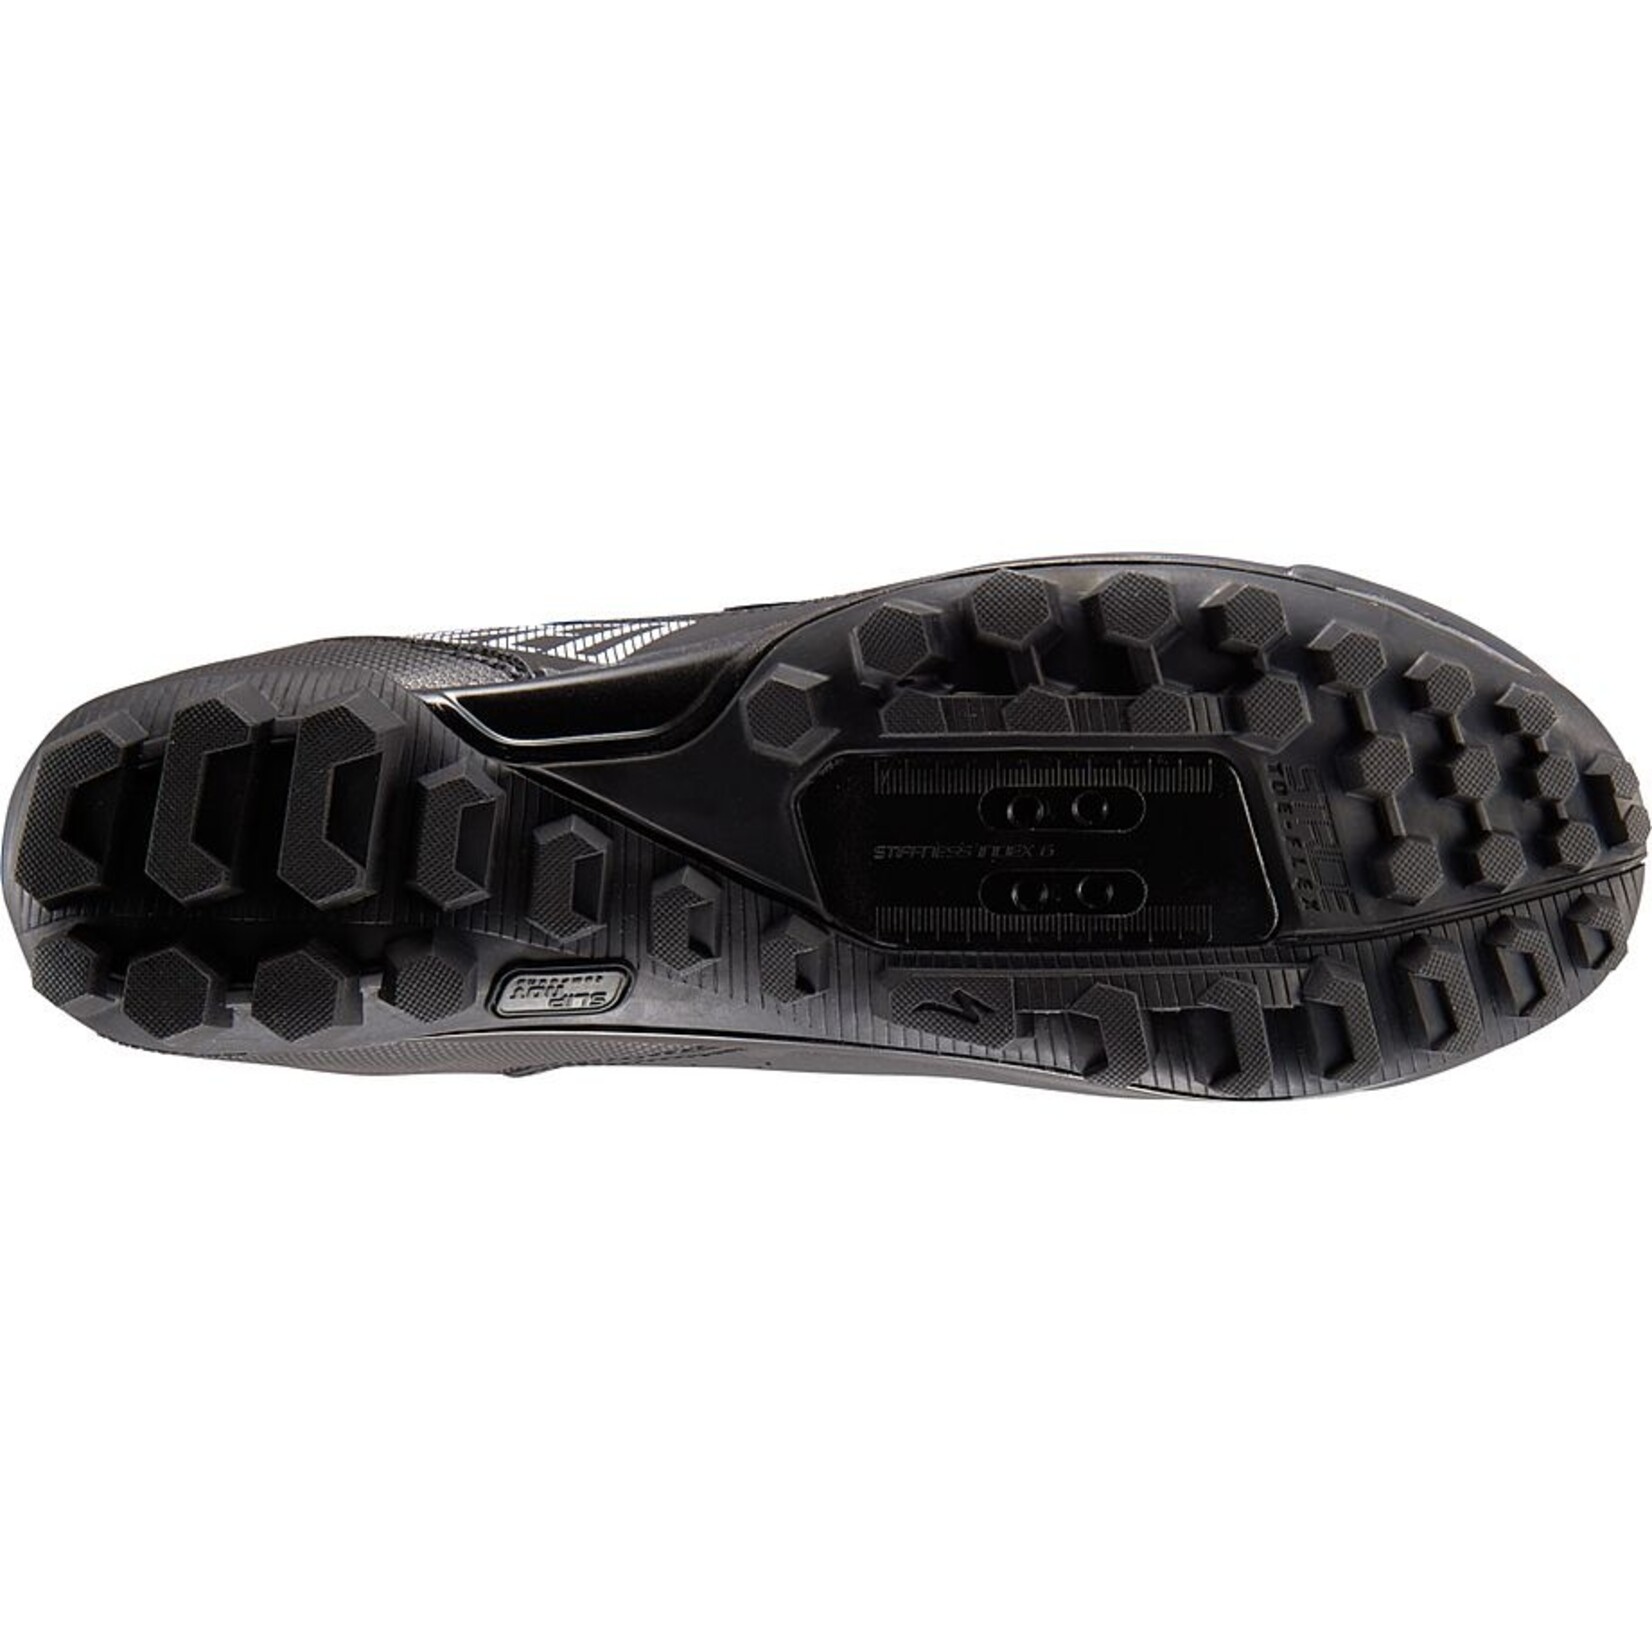 Specialized Recon 1.0 Mountain Bike Shoes in Black